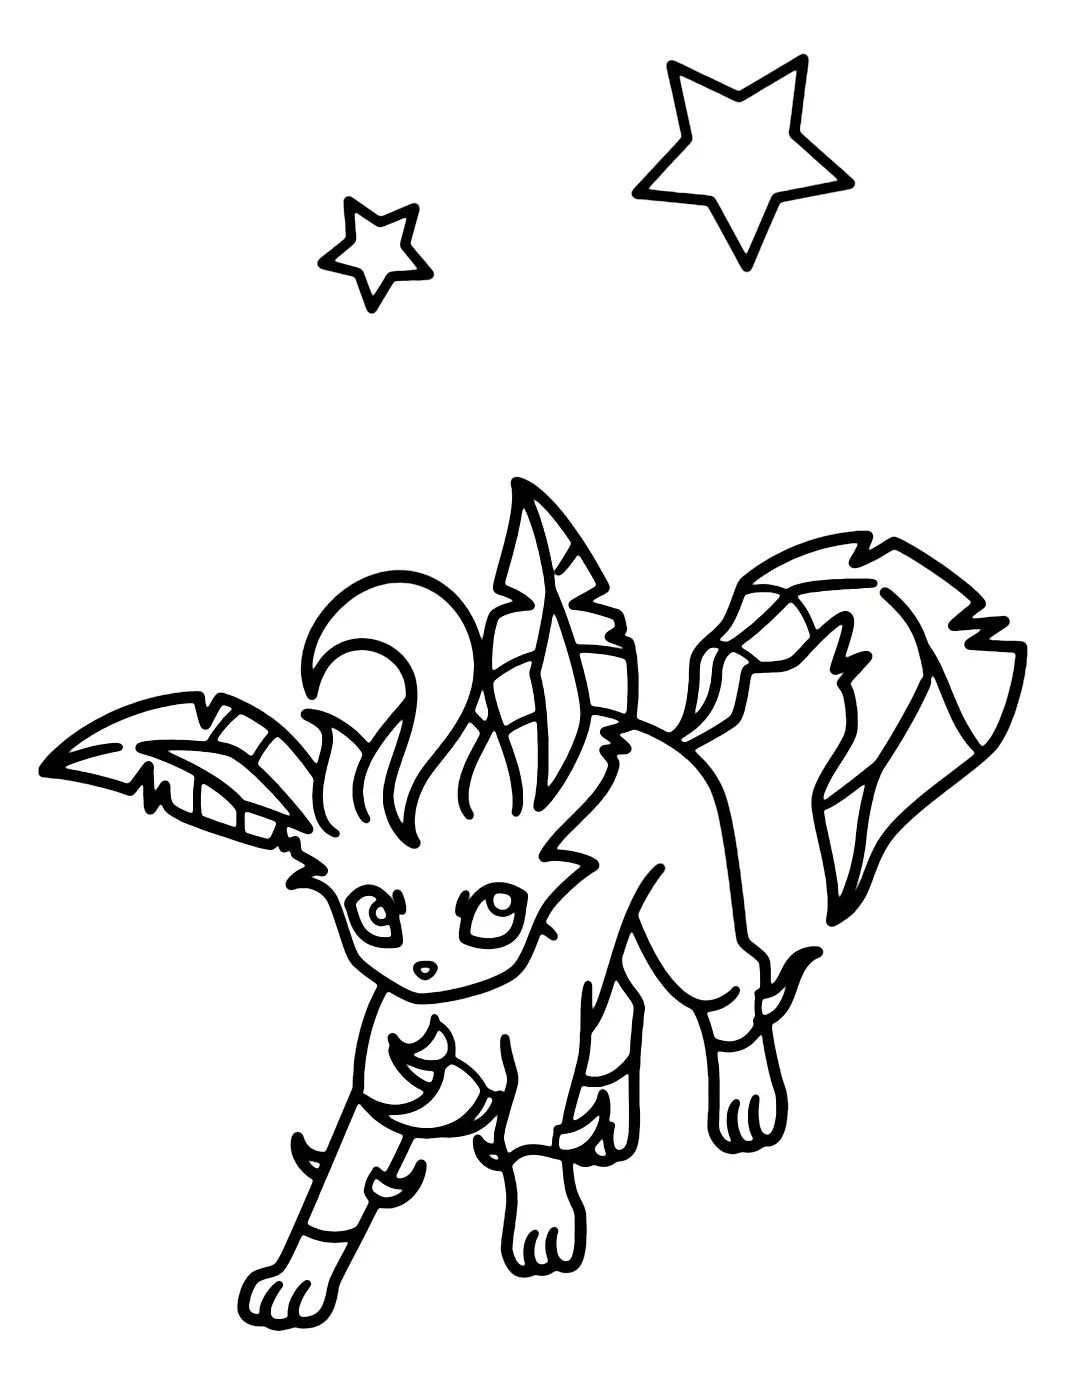 Leafeon Coloring Pages